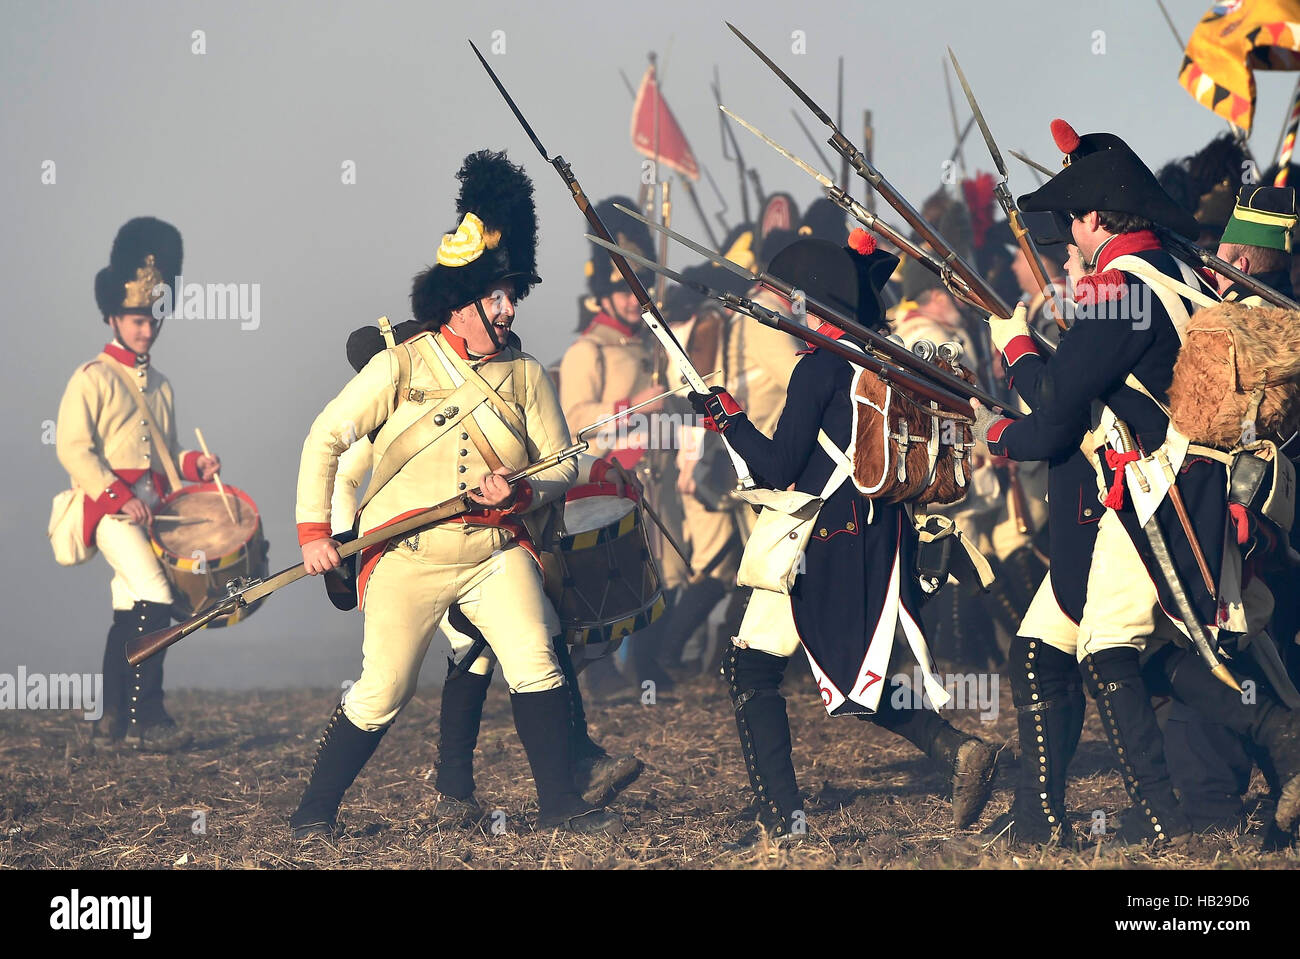 Tvarozna, Czech Republic. 03rd Dec, 2016. The re-enactment of the Battle at Slavkov (Austerlitz), where the Napoleonic army scored a famous victory in 1805, was staged by history fans in period uniforms in Tvarozna, Czech republic, December 3, 2016. © Vaclav Salek/CTK Photo/Alamy Live News Stock Photo